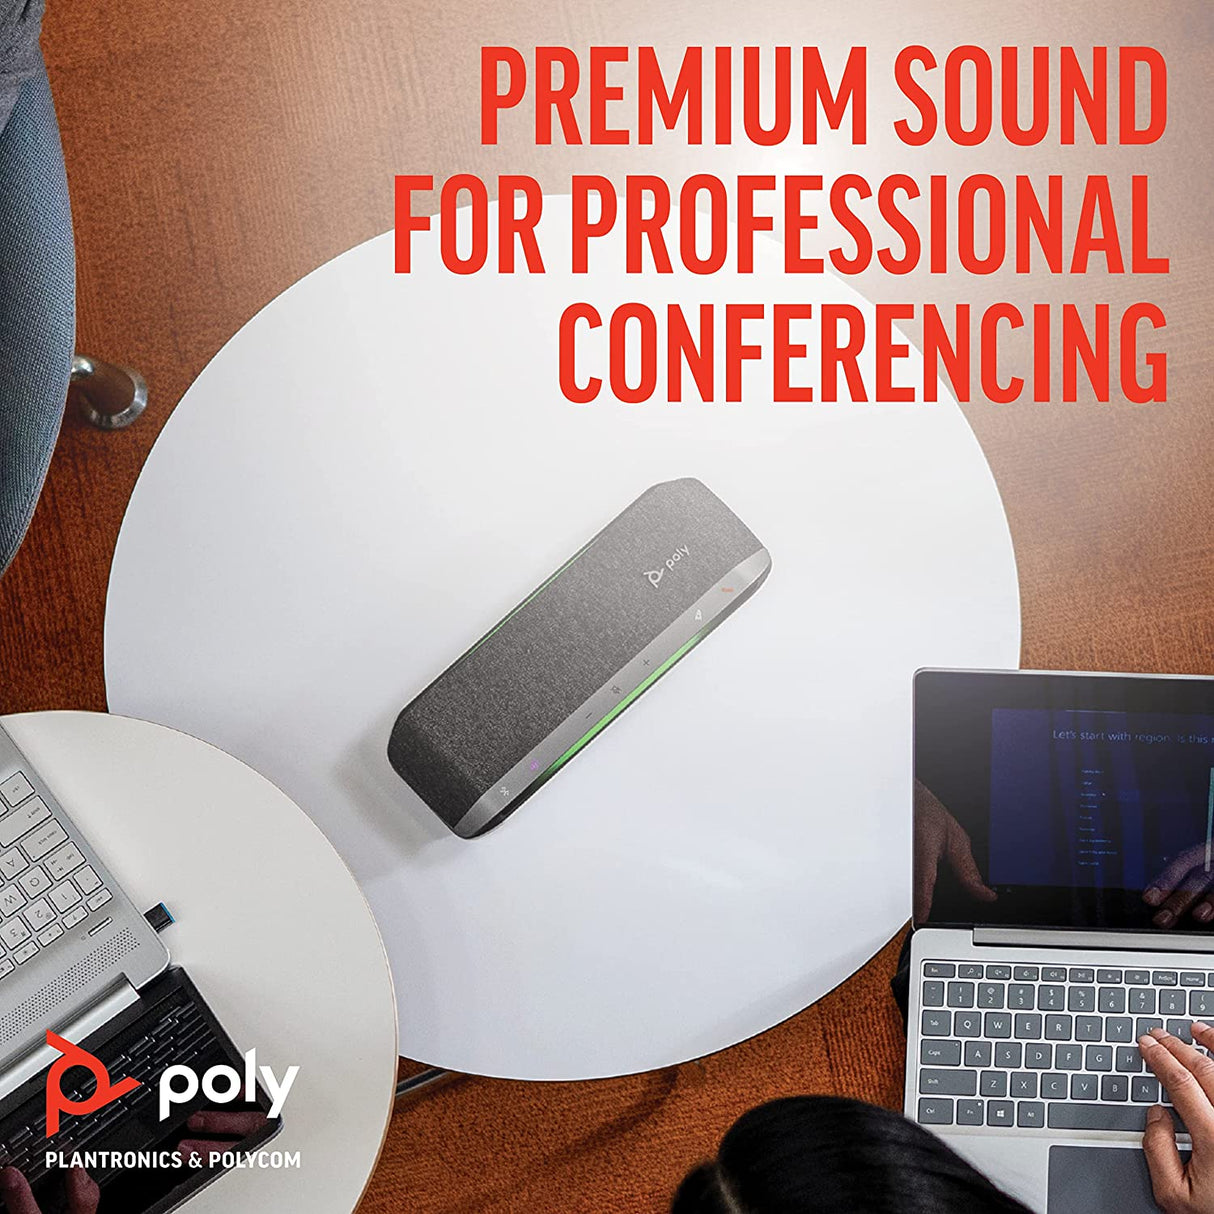 Poly - Sync 40 Smart -Speakerphone (Plantronics) - Flexible Work Spaces - Connect to PC/Mac via Combined USB-A/USB-C -Cable and Smartphones via -Bluetooth - Works with Teams (Certified), Zoom &amp; more Sync 40 Speakerphone Teams Version Speakerphone